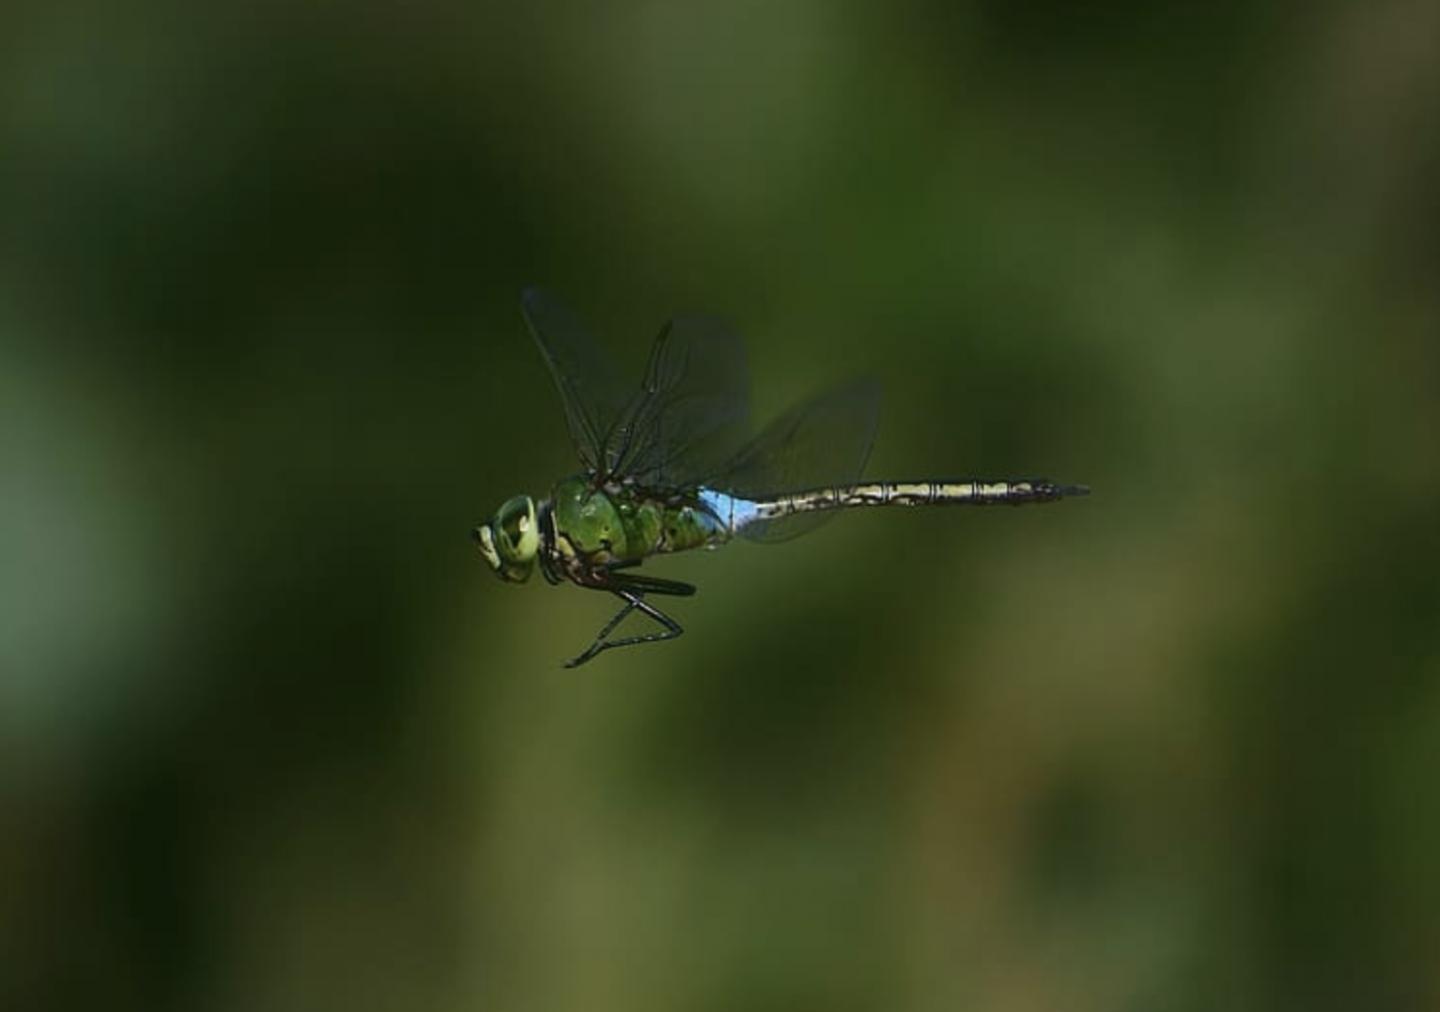 To See a Dragonfly's Wings in Flight Clearly Requires Keen Visual Acuity